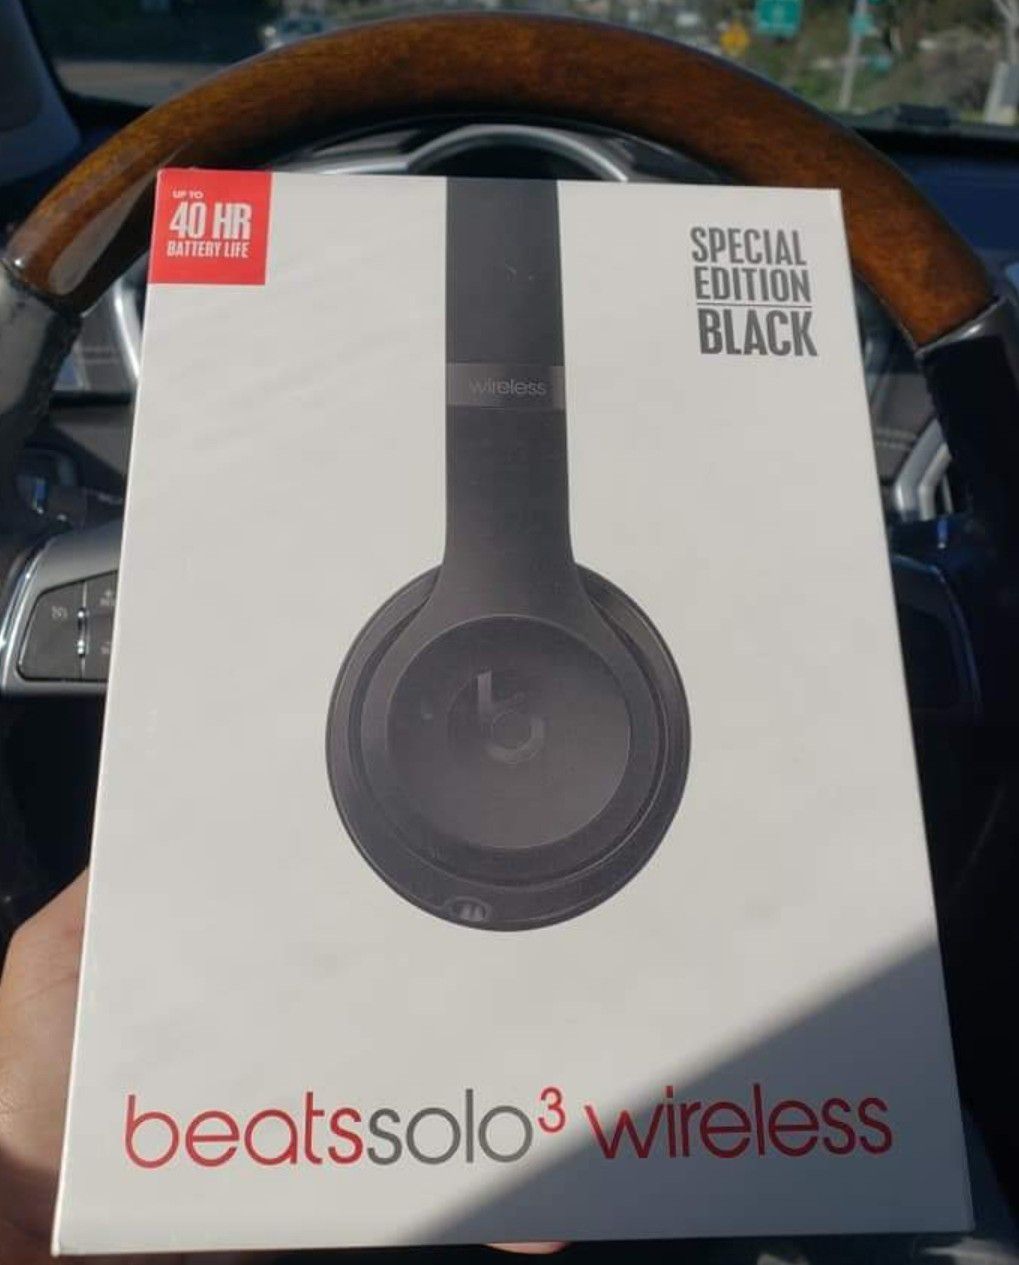 Beats solo 3 wireless bluetooth headphones by dr dre